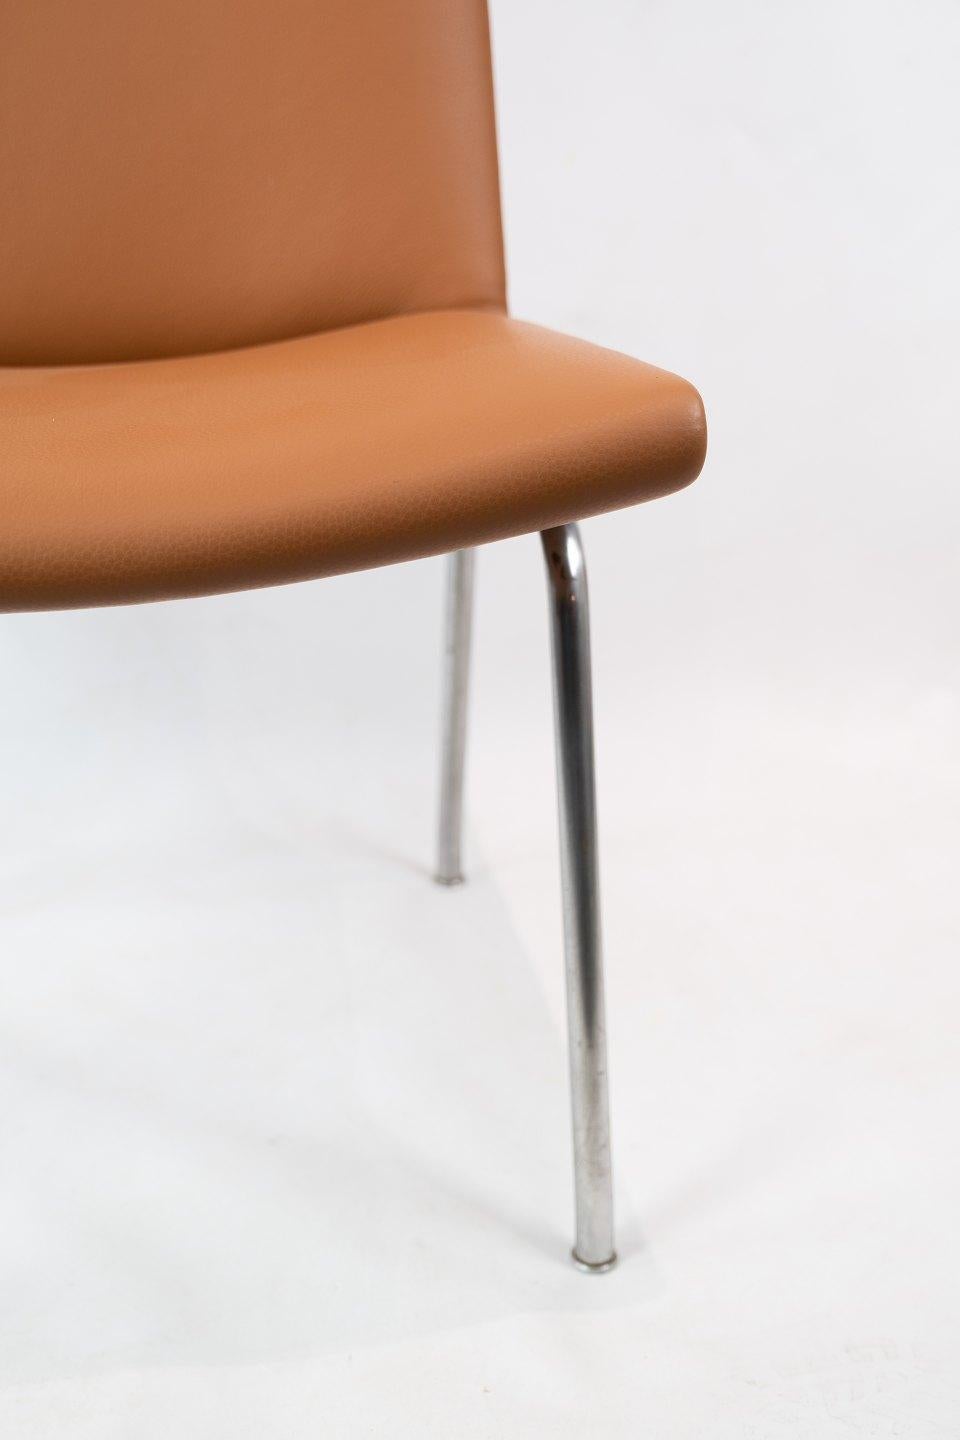 Leather The Airport-Chair, Model AP37, Designed by Hans J. Wegner in the 1950s For Sale